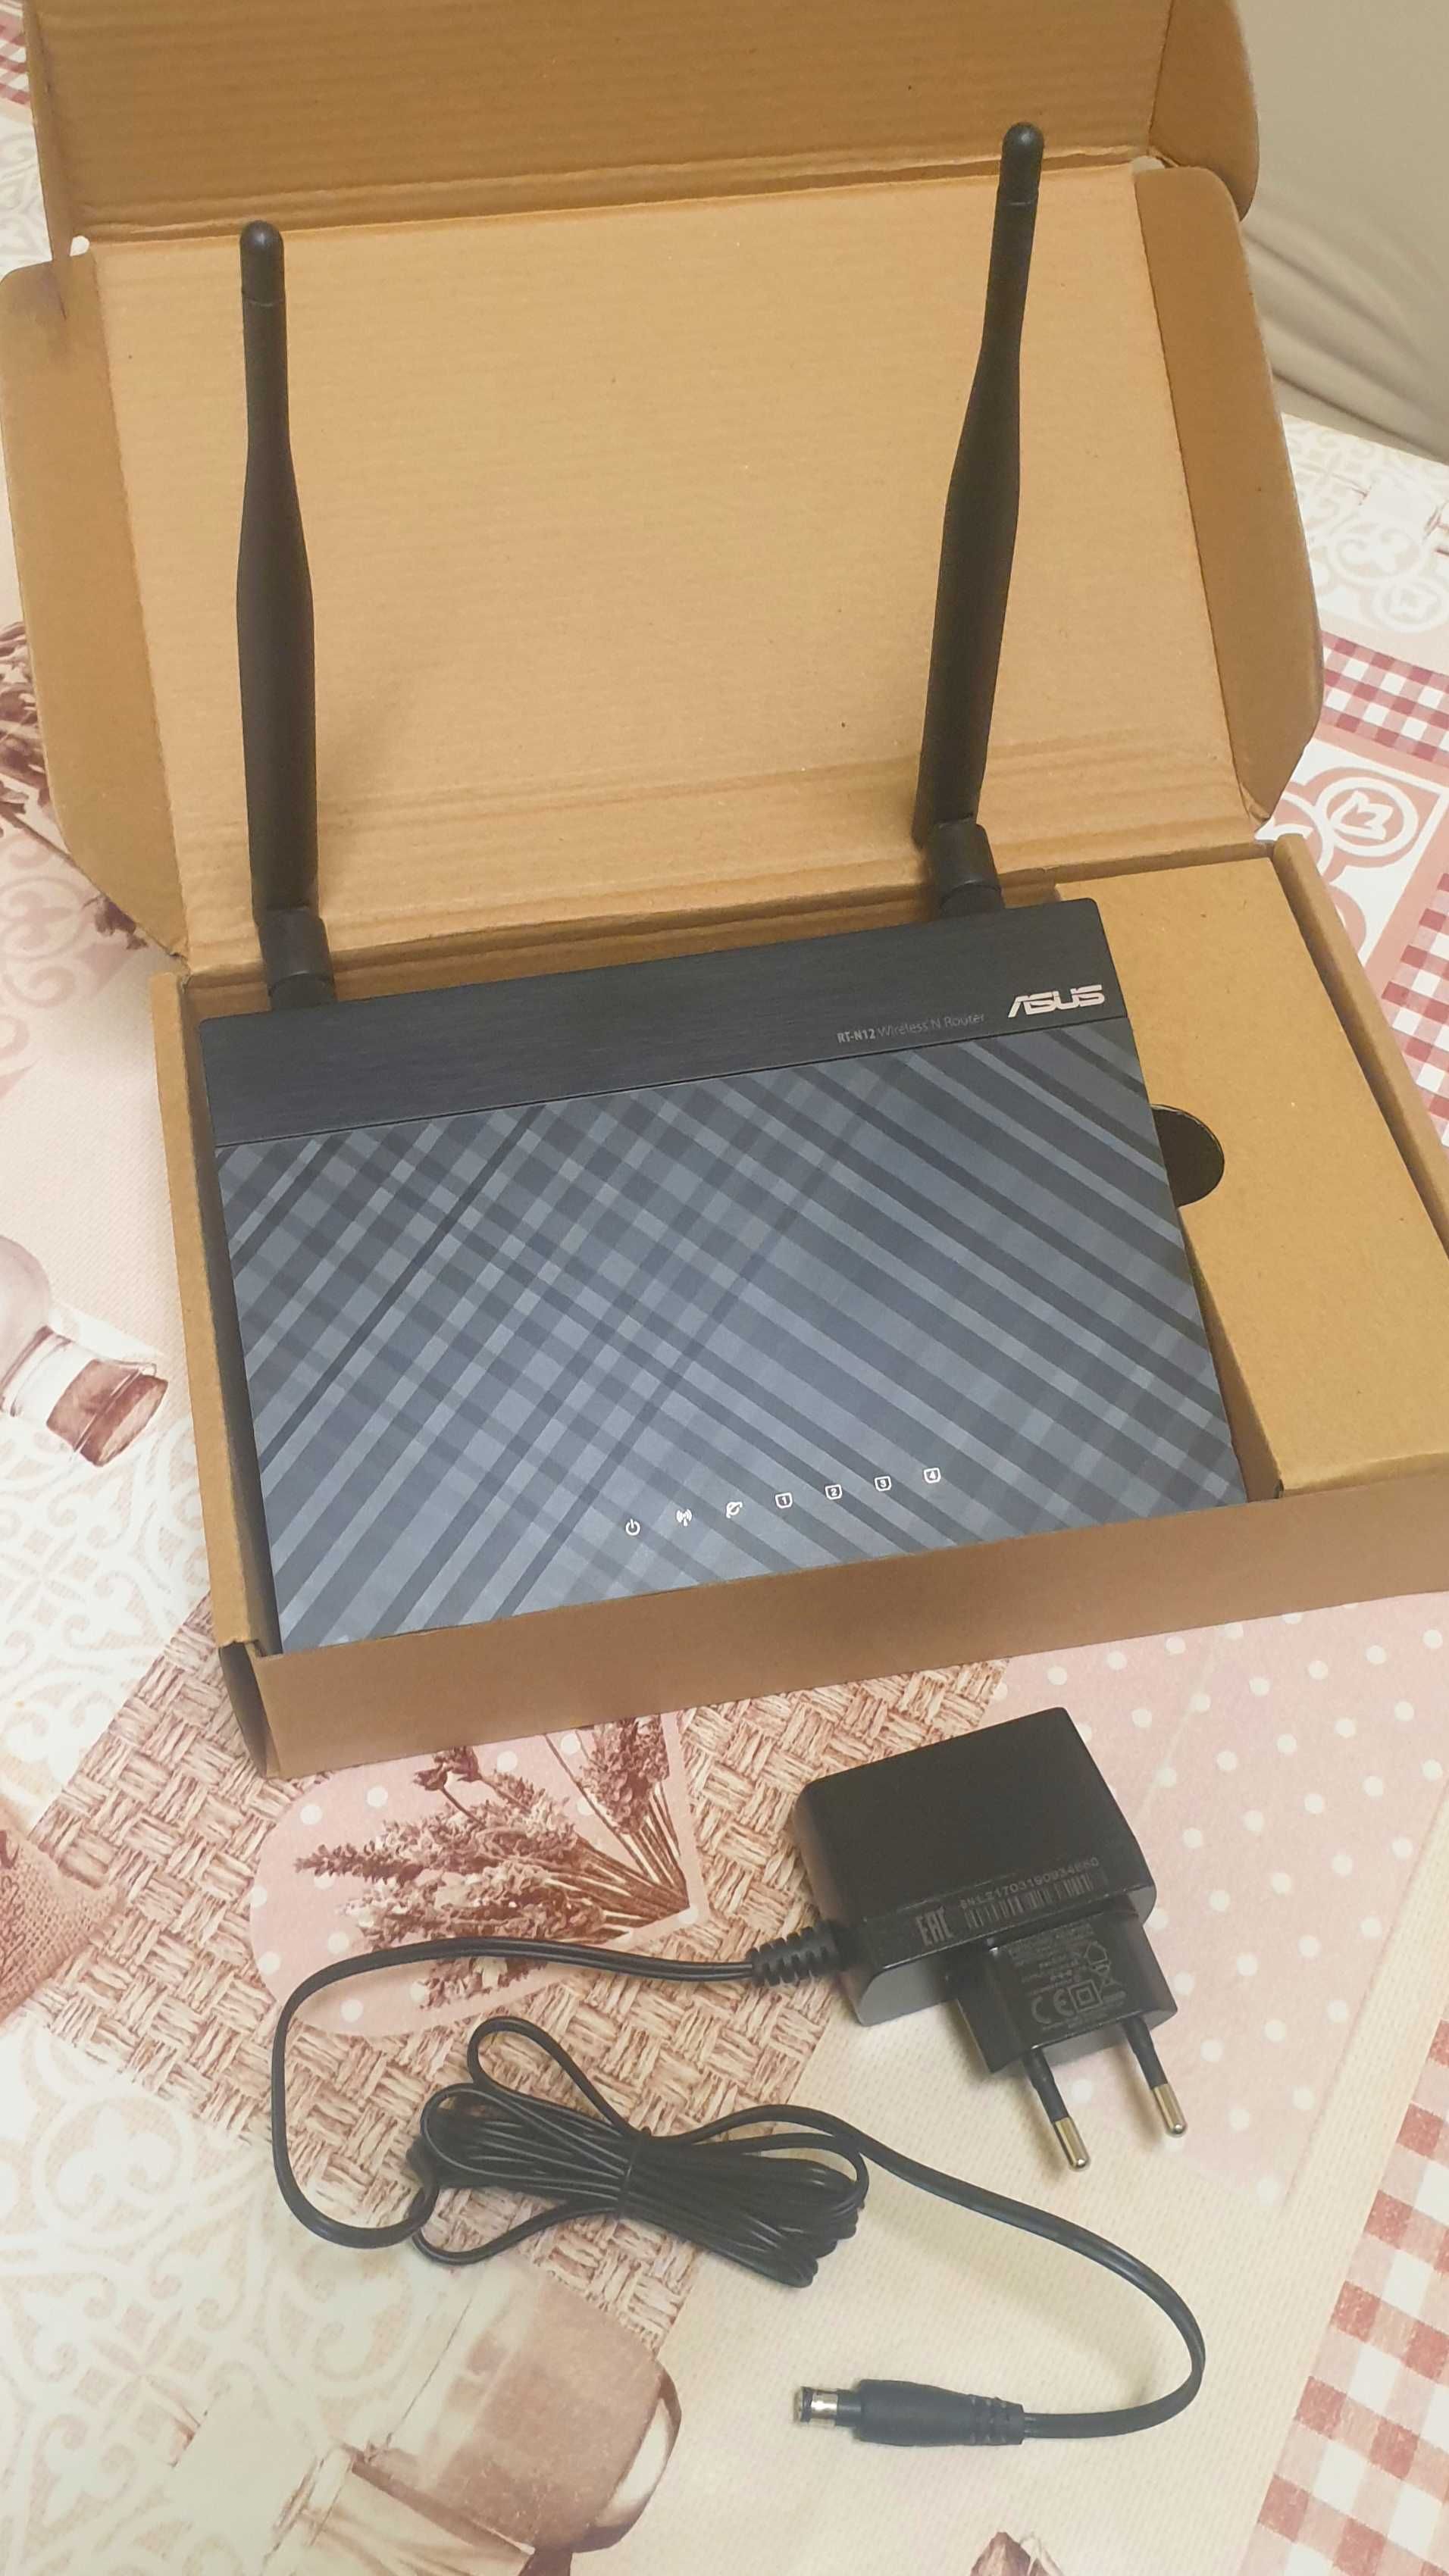 Router Asus RT-N12